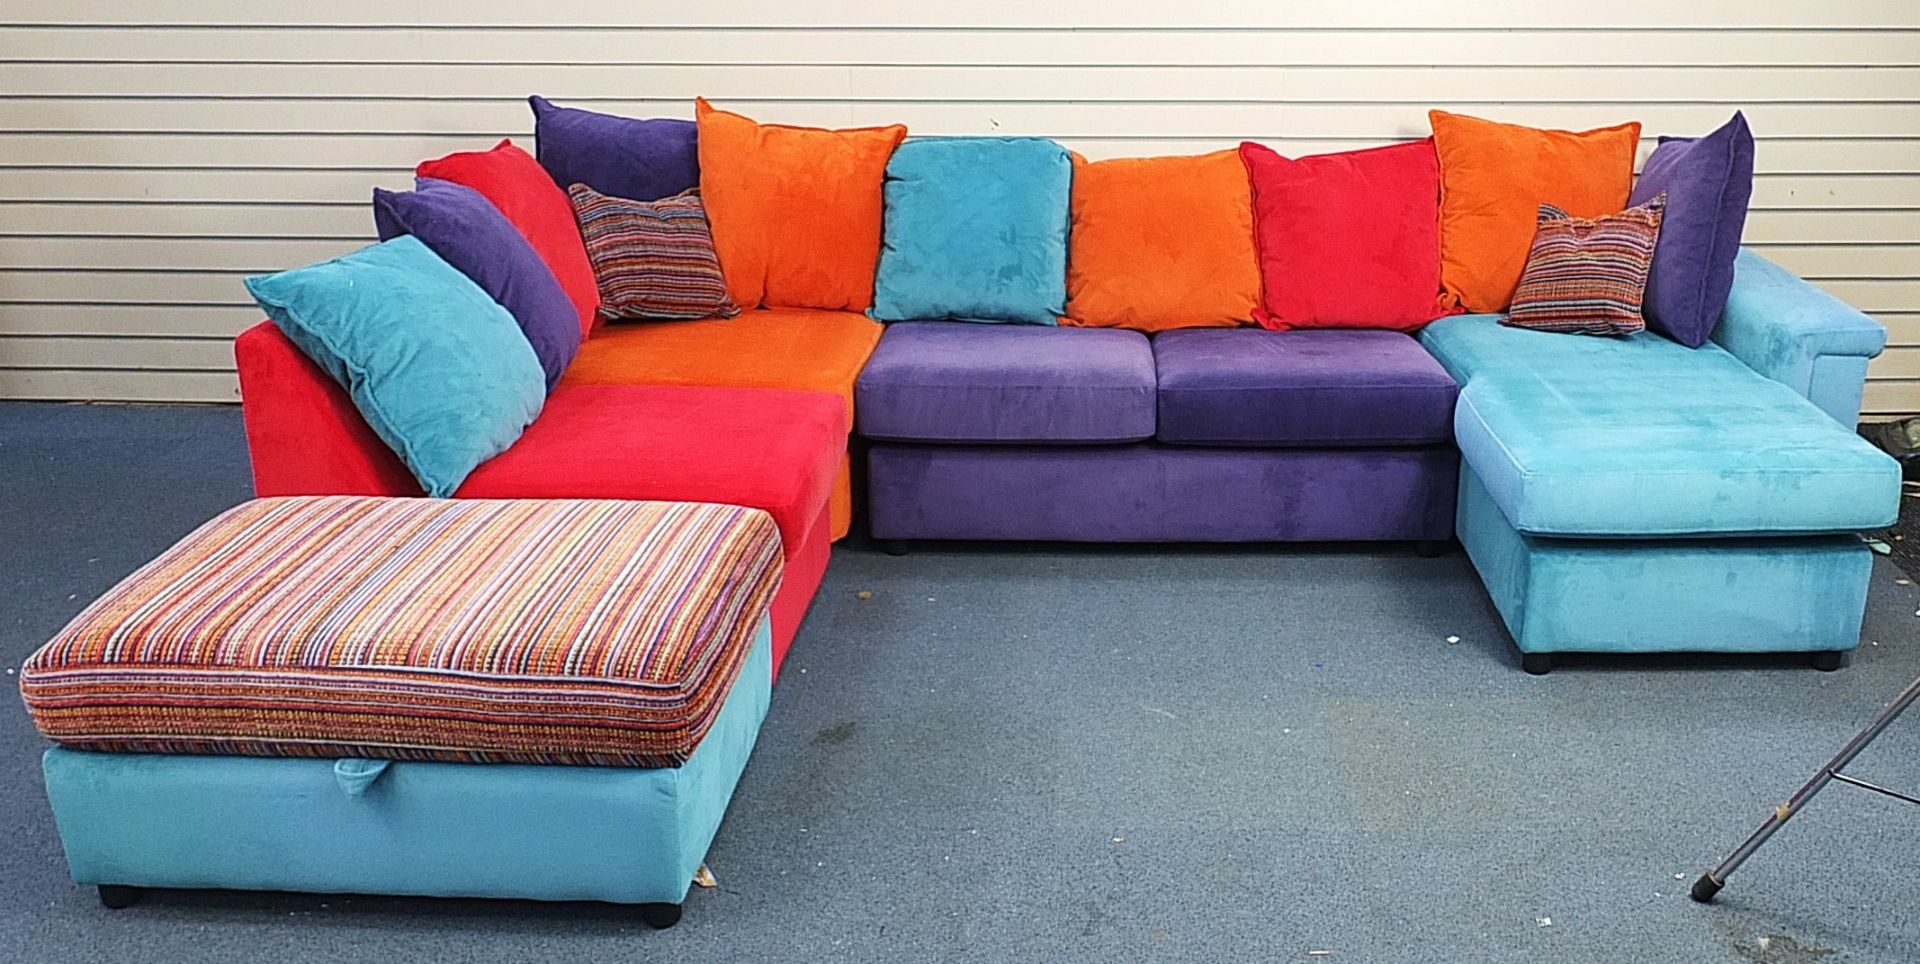 Contemporary DFS Skittle modular sofa with five sections, 88cm H x 330cm W x 240cm D as set up in